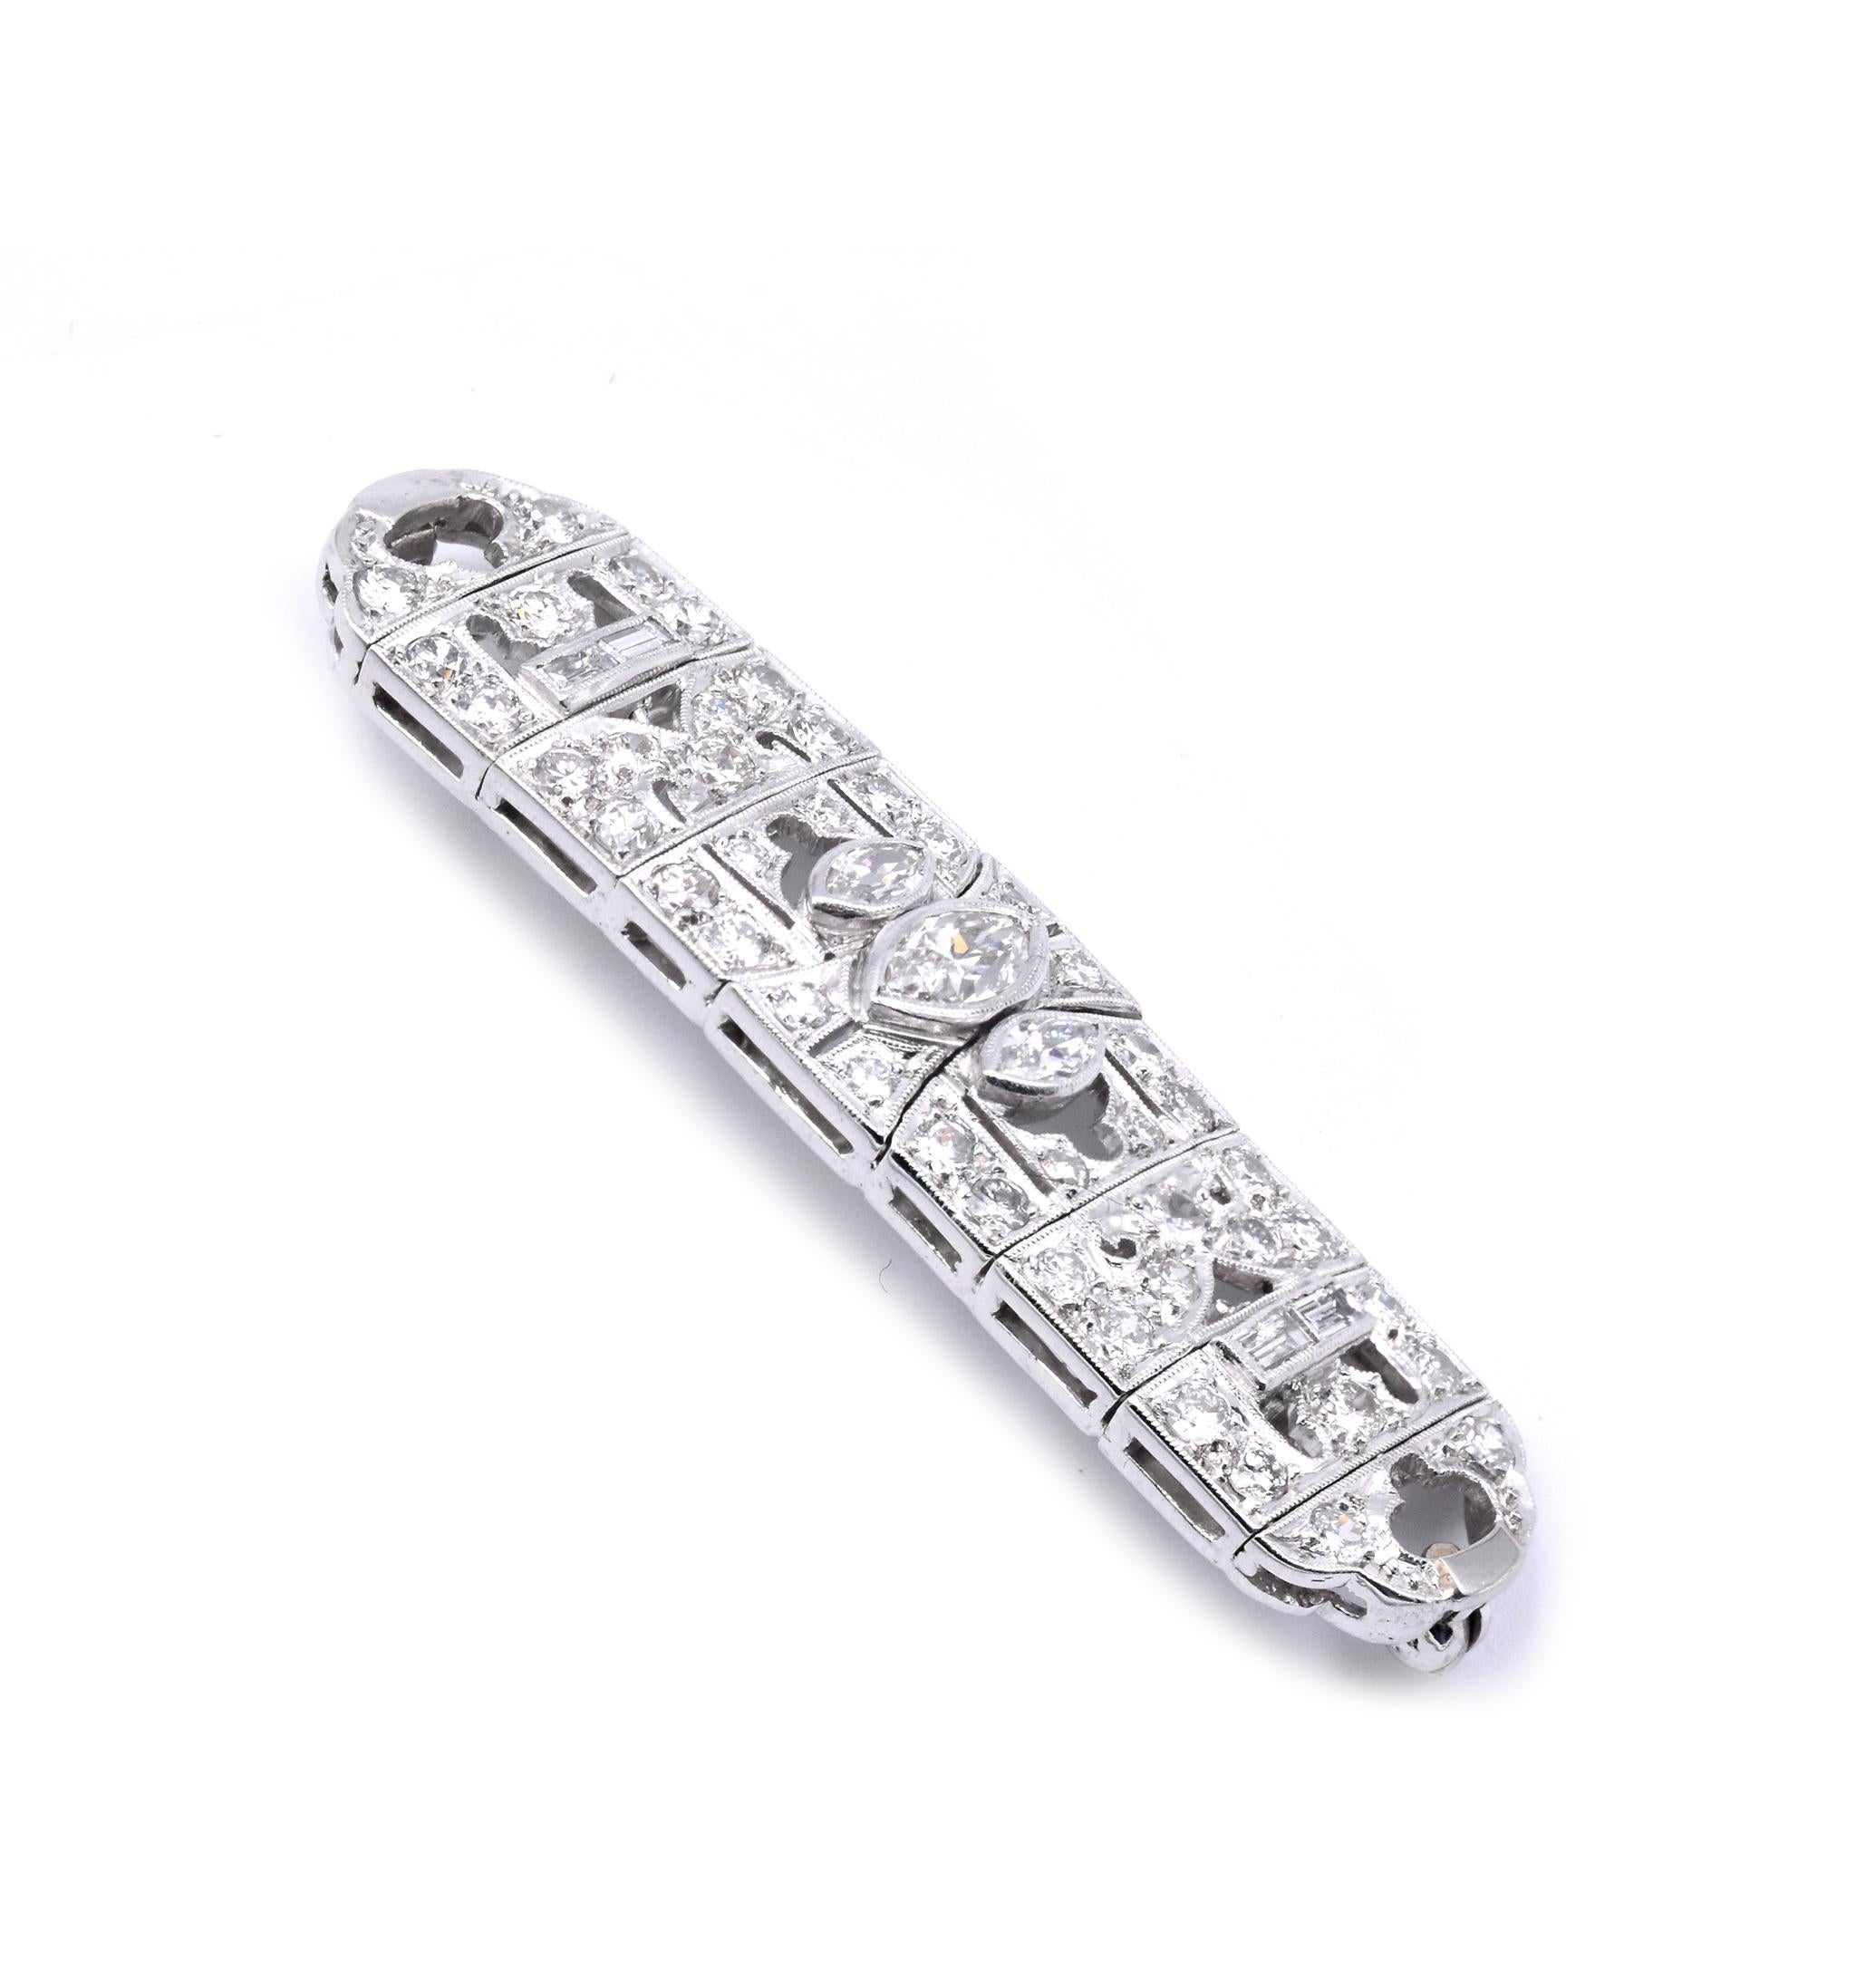 Designer: custom
Material: Platinum
Diamond: 3 marquise cut = .63cttw 
Diamond: 2 baguette cut = .12cttw
Diamond: 44 round cut = 2.20cttw
Dimensions: pin is approximately 51mm X 12.85mm
Weight: 13. grams
